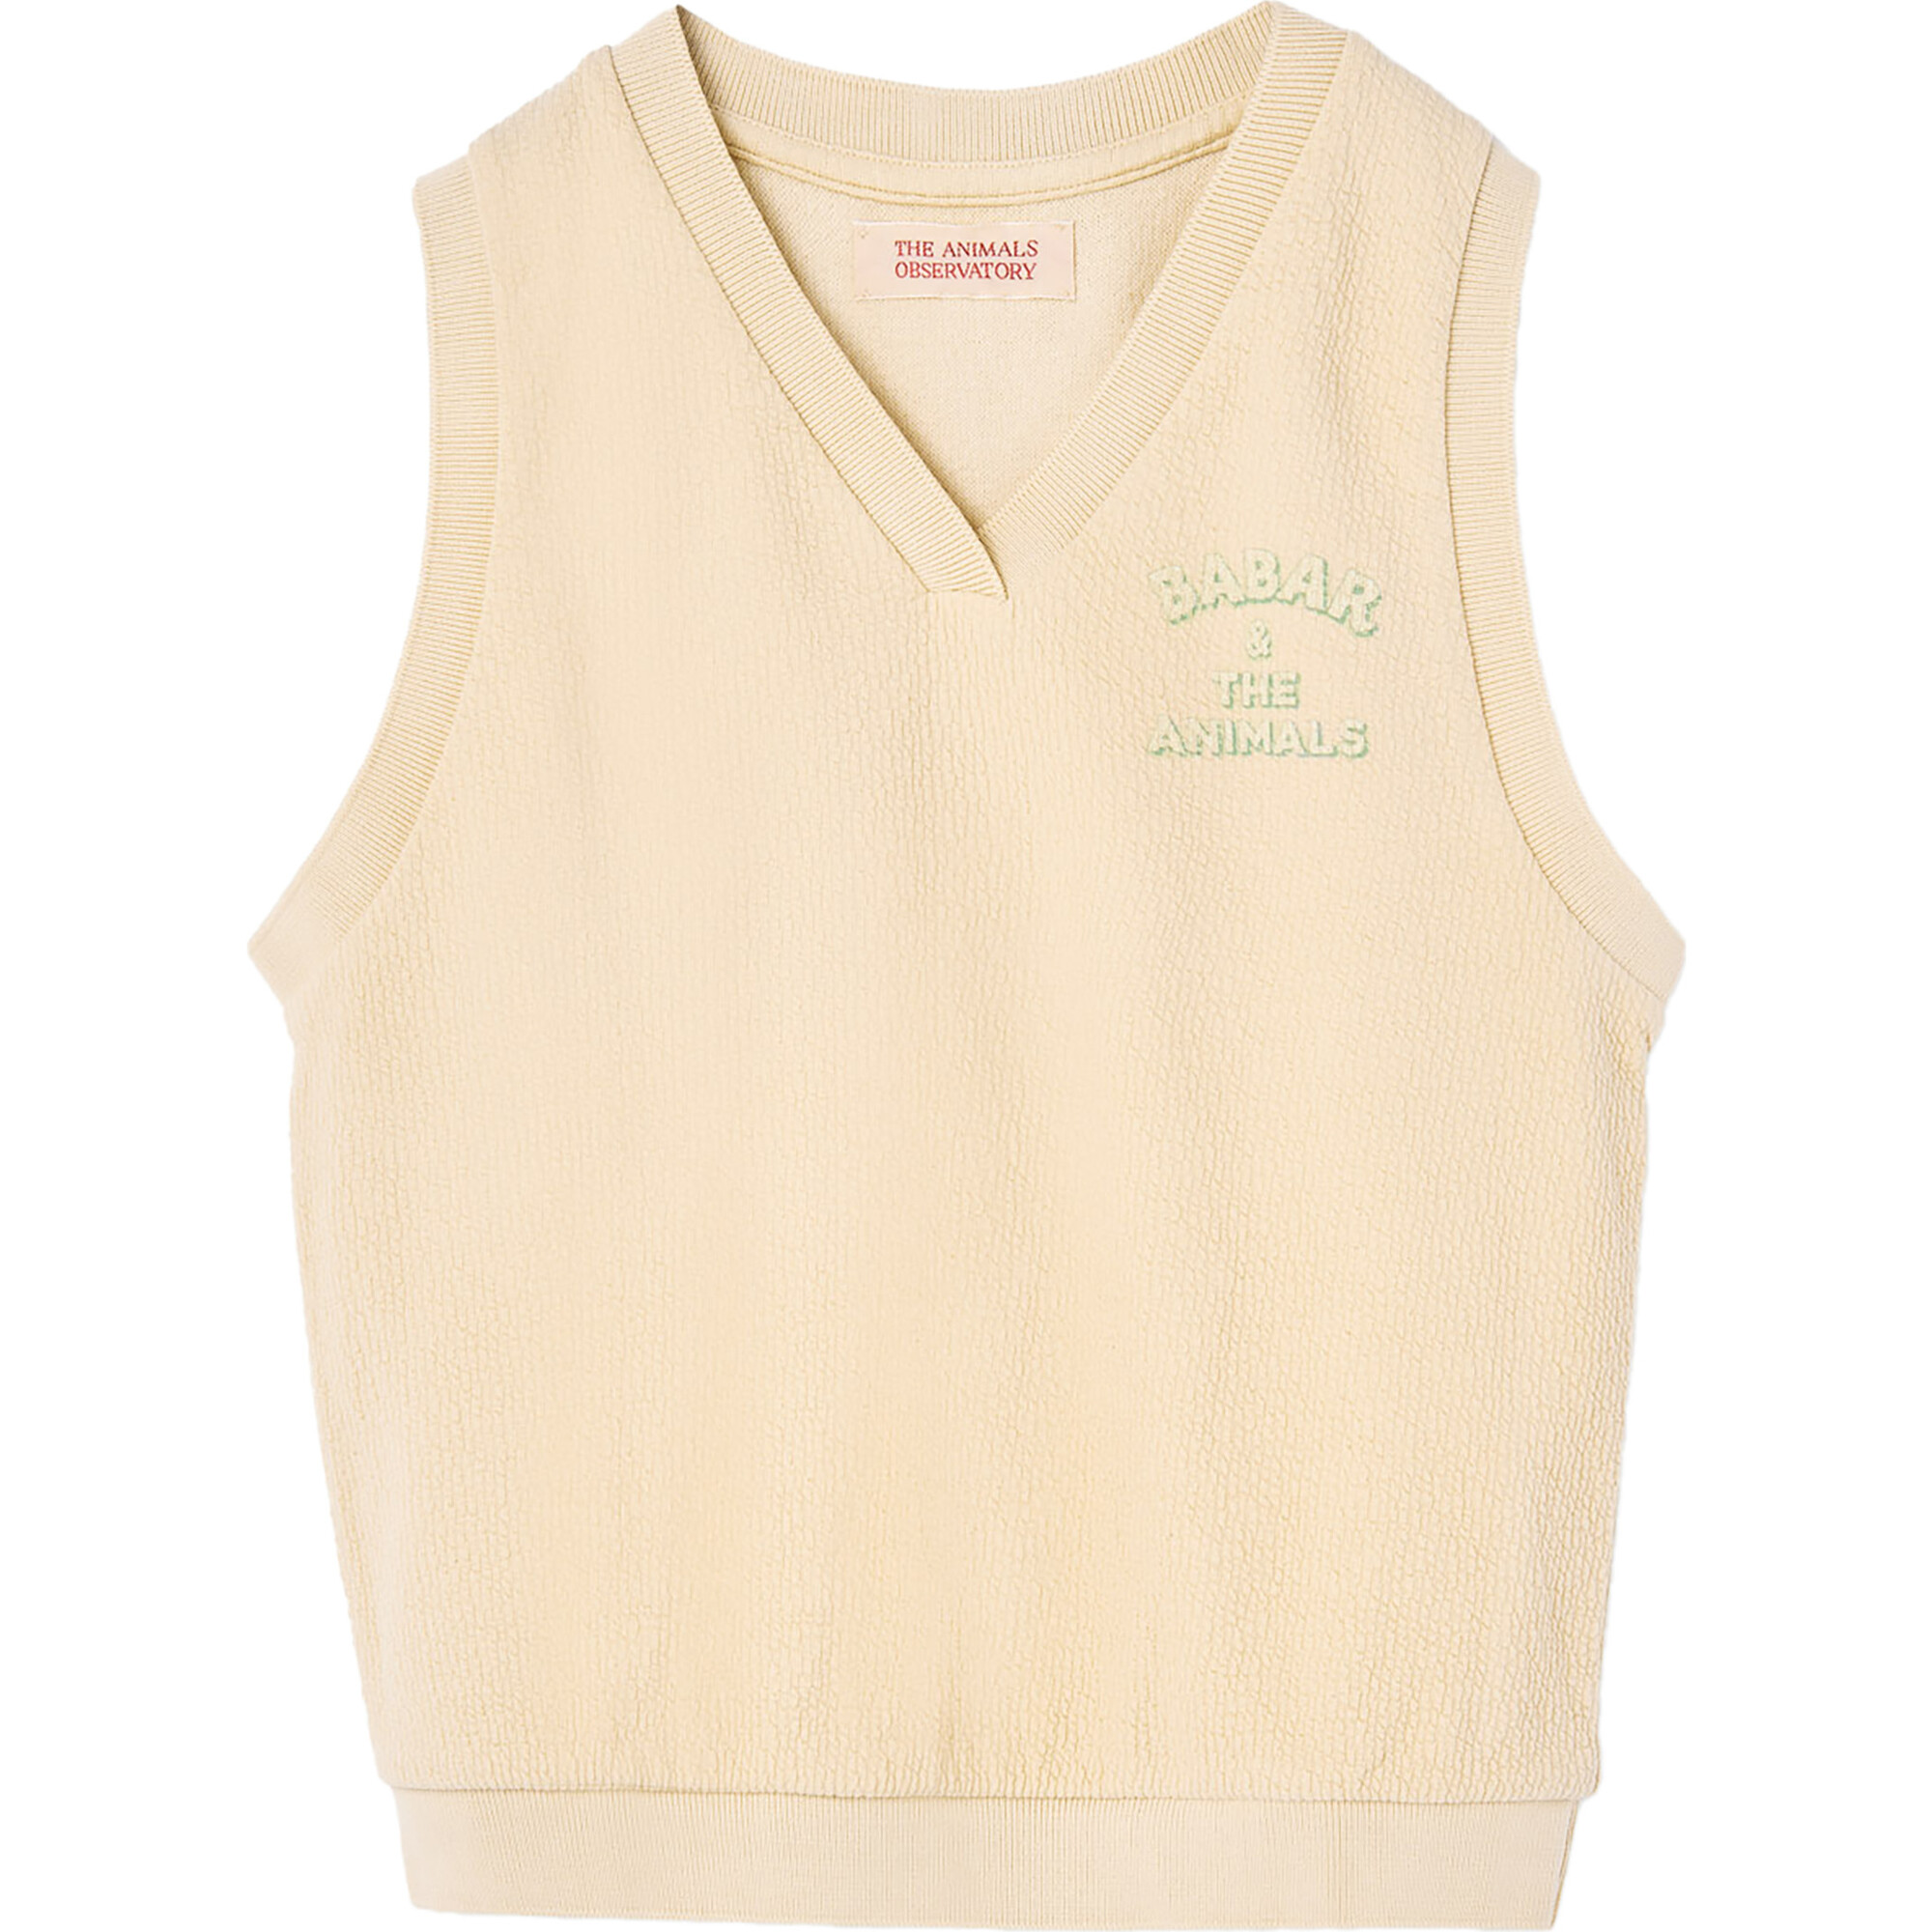 THE ANIMALS OBSERVATORY Babar Vest 6Y